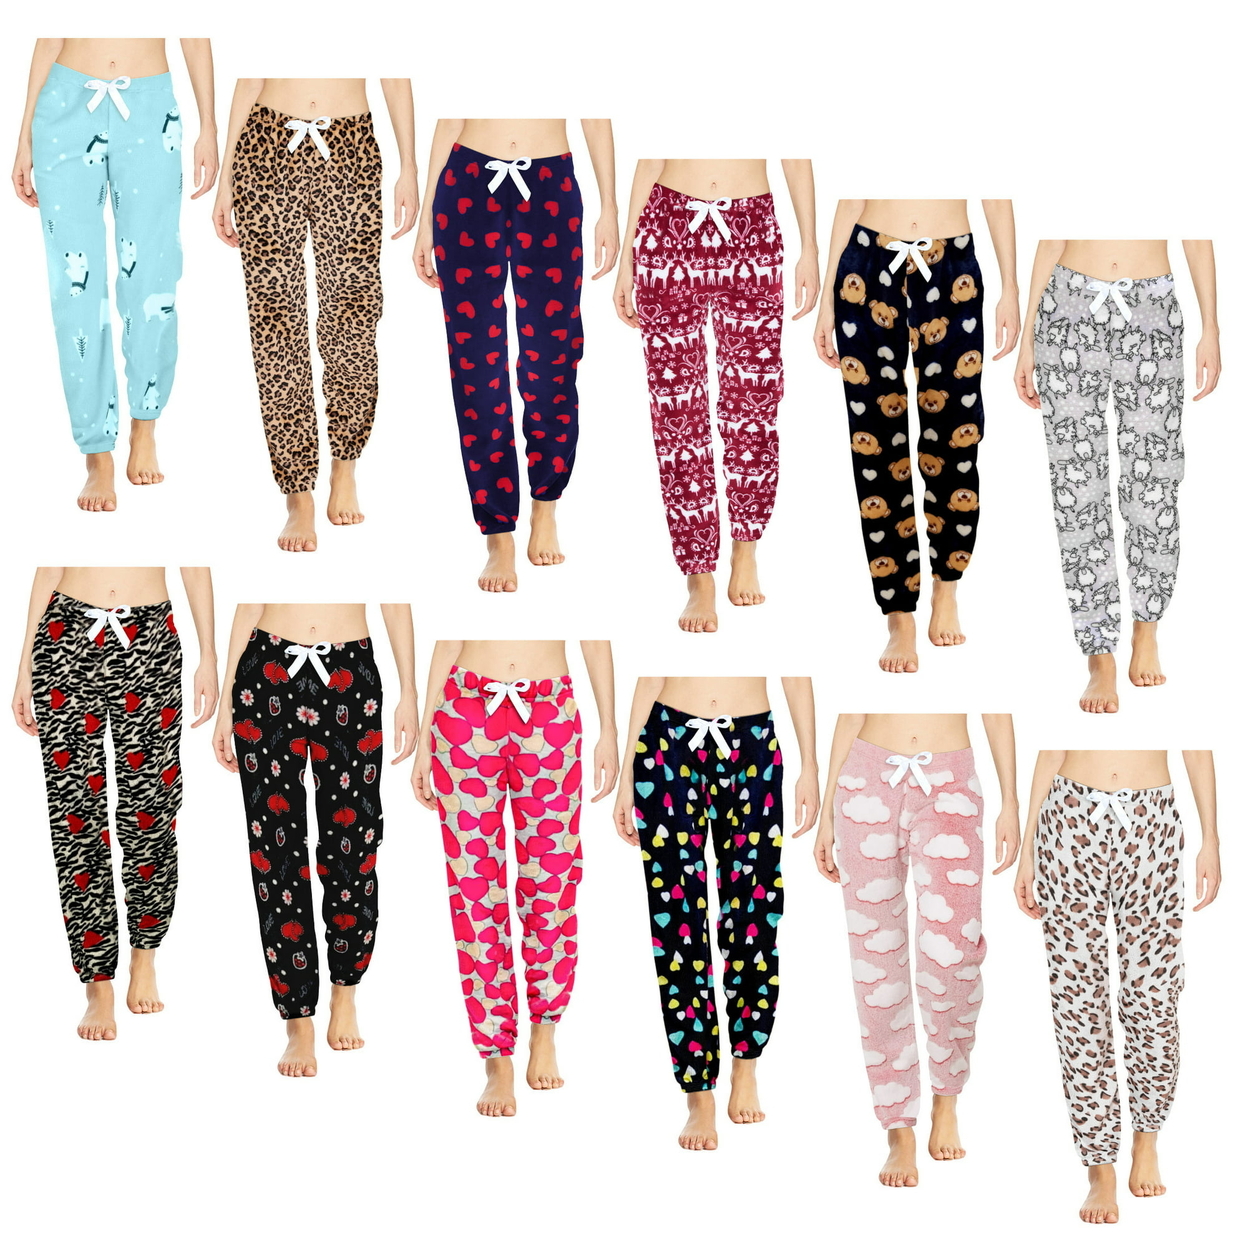 Multi-Pack: Women's Printed Ultra-Soft Comfy Stretch Micro-Fleece Pajama Lounge Pants - 1-pack, Love, Small